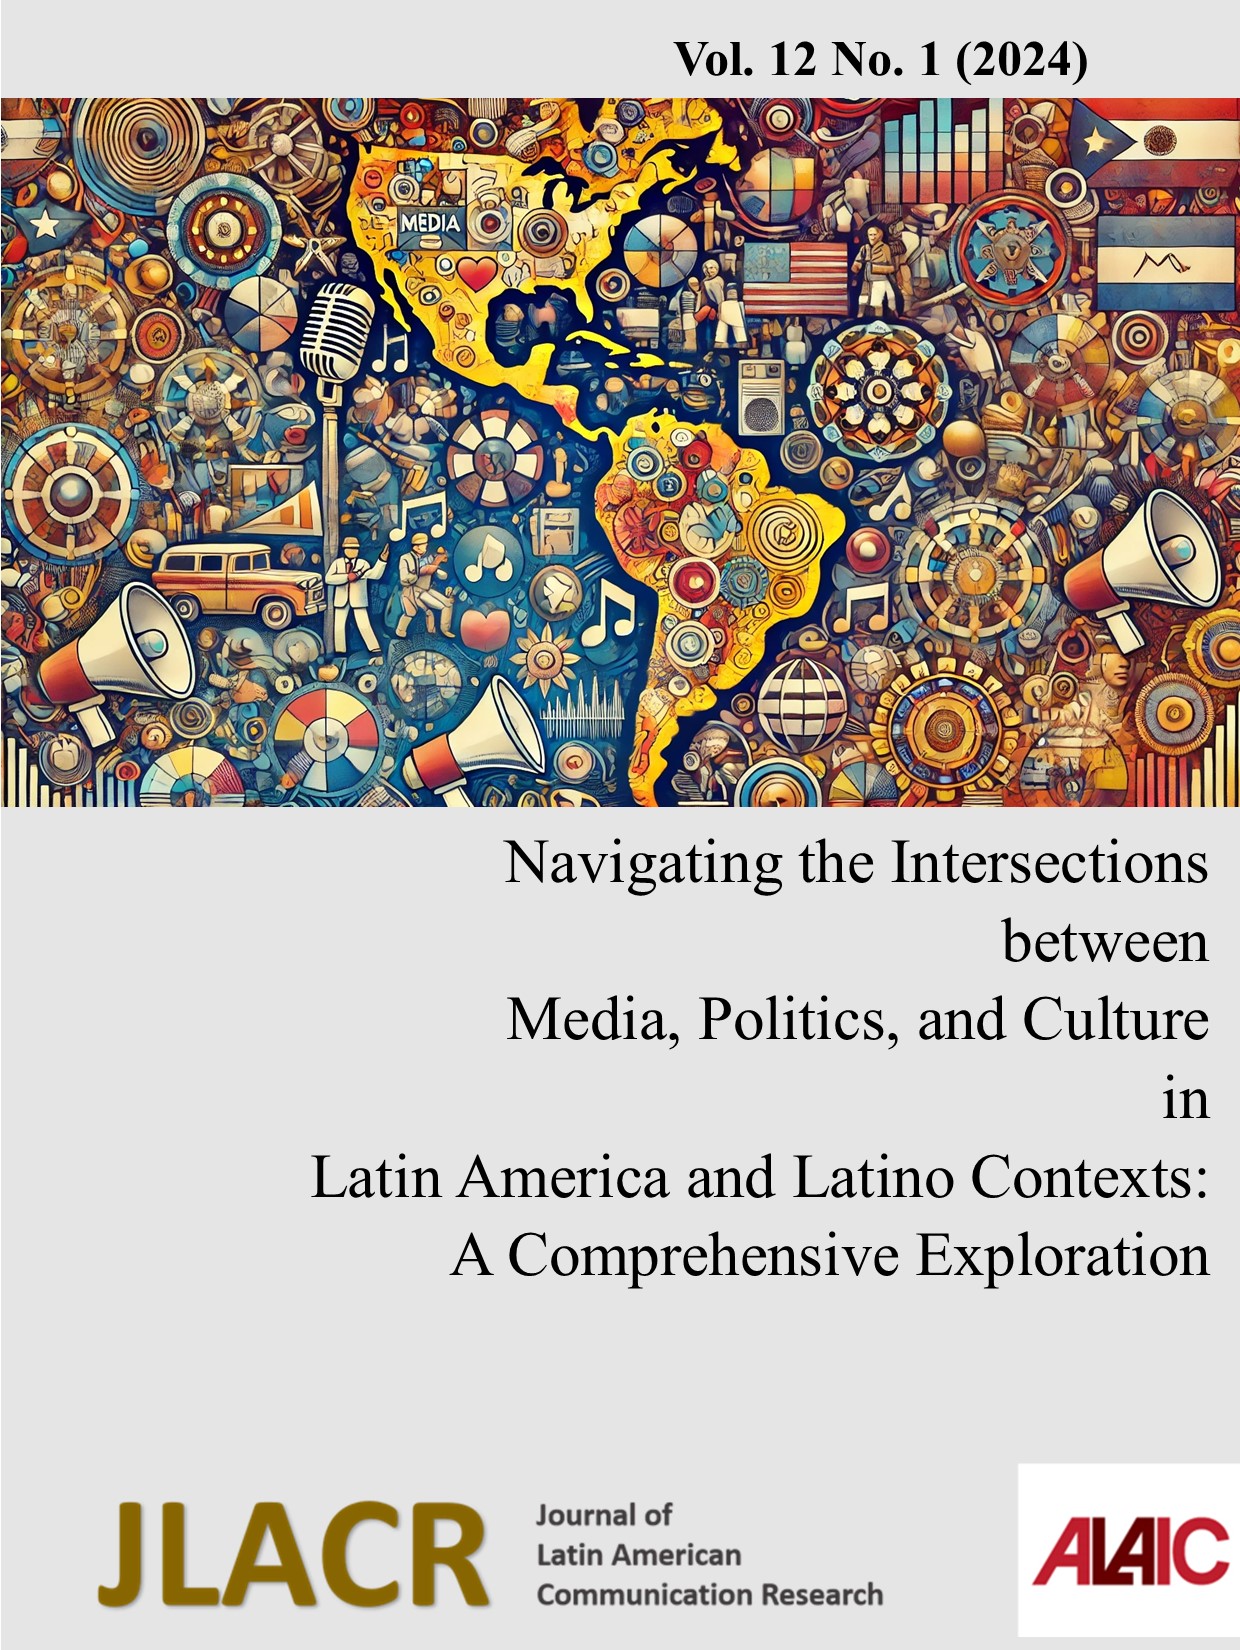 					View Vol. 12 No. 1 (2024): Navigating the Intersections between Media, Politics, and Culture in Latin America and Latino Contexts: A Comprehensive Exploration
				